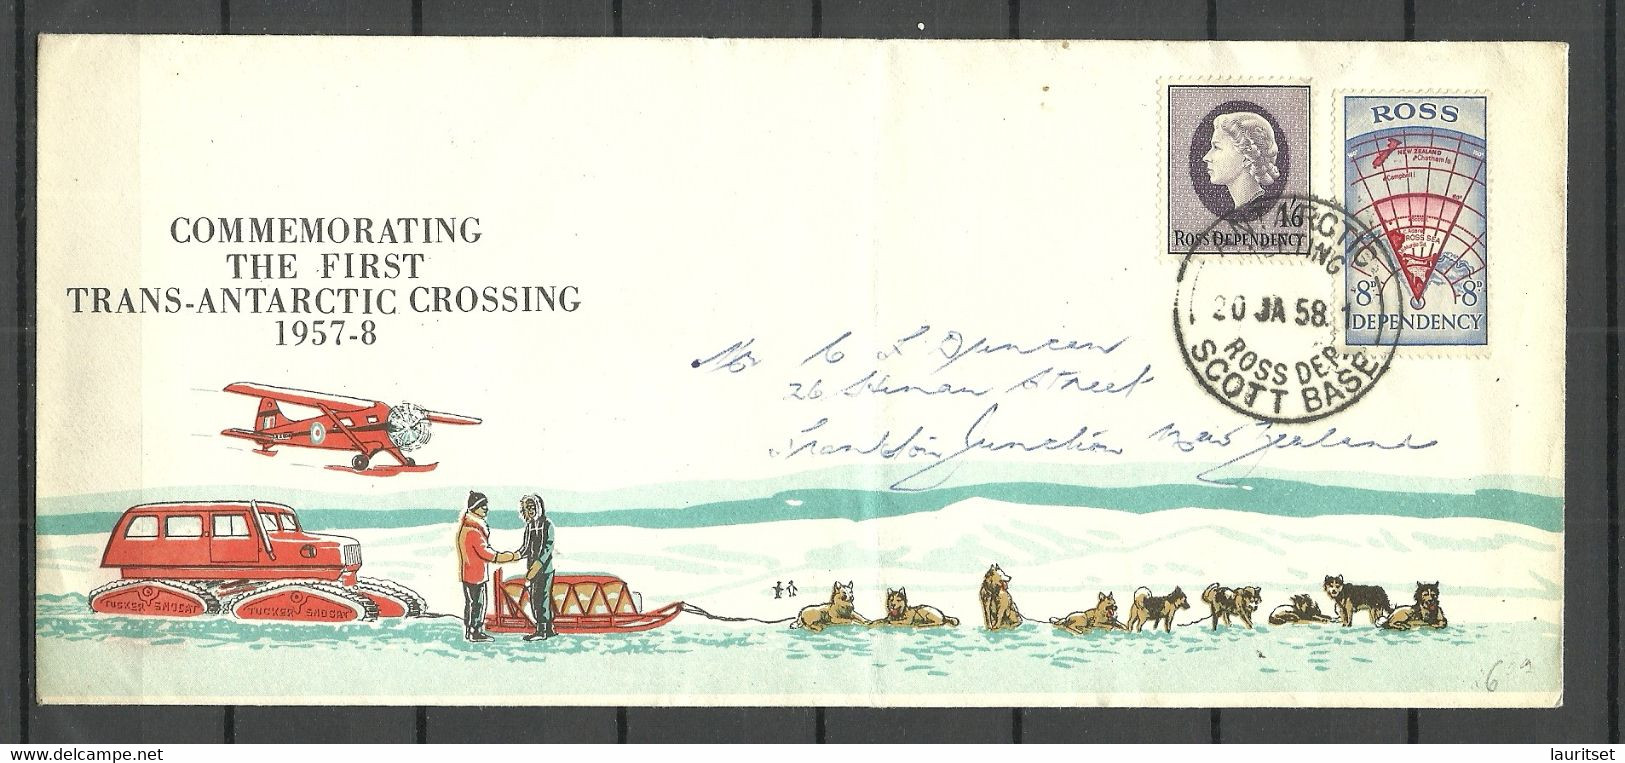 Ross Dependency 1958 Commemorative Cover O Scott Base 20.01.1958 Trans-Atlantic Crossing To New Zealand - Covers & Documents